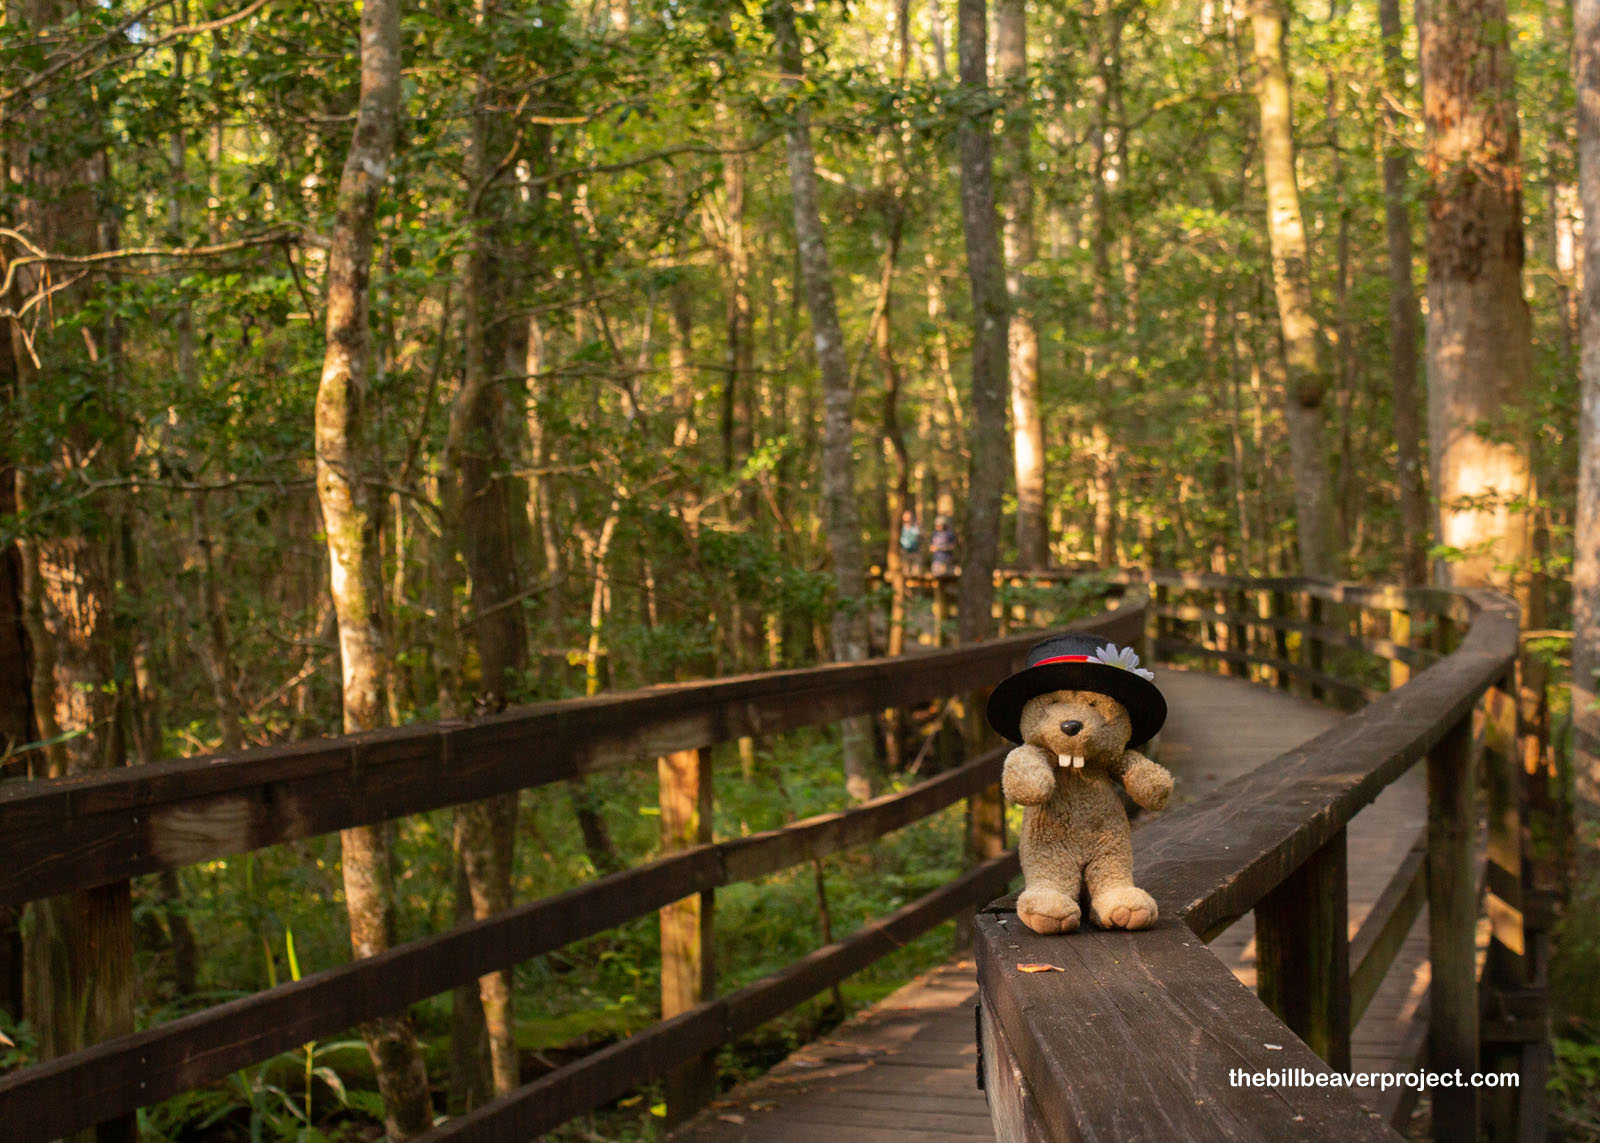 The boardwalk loop through the thick forest!